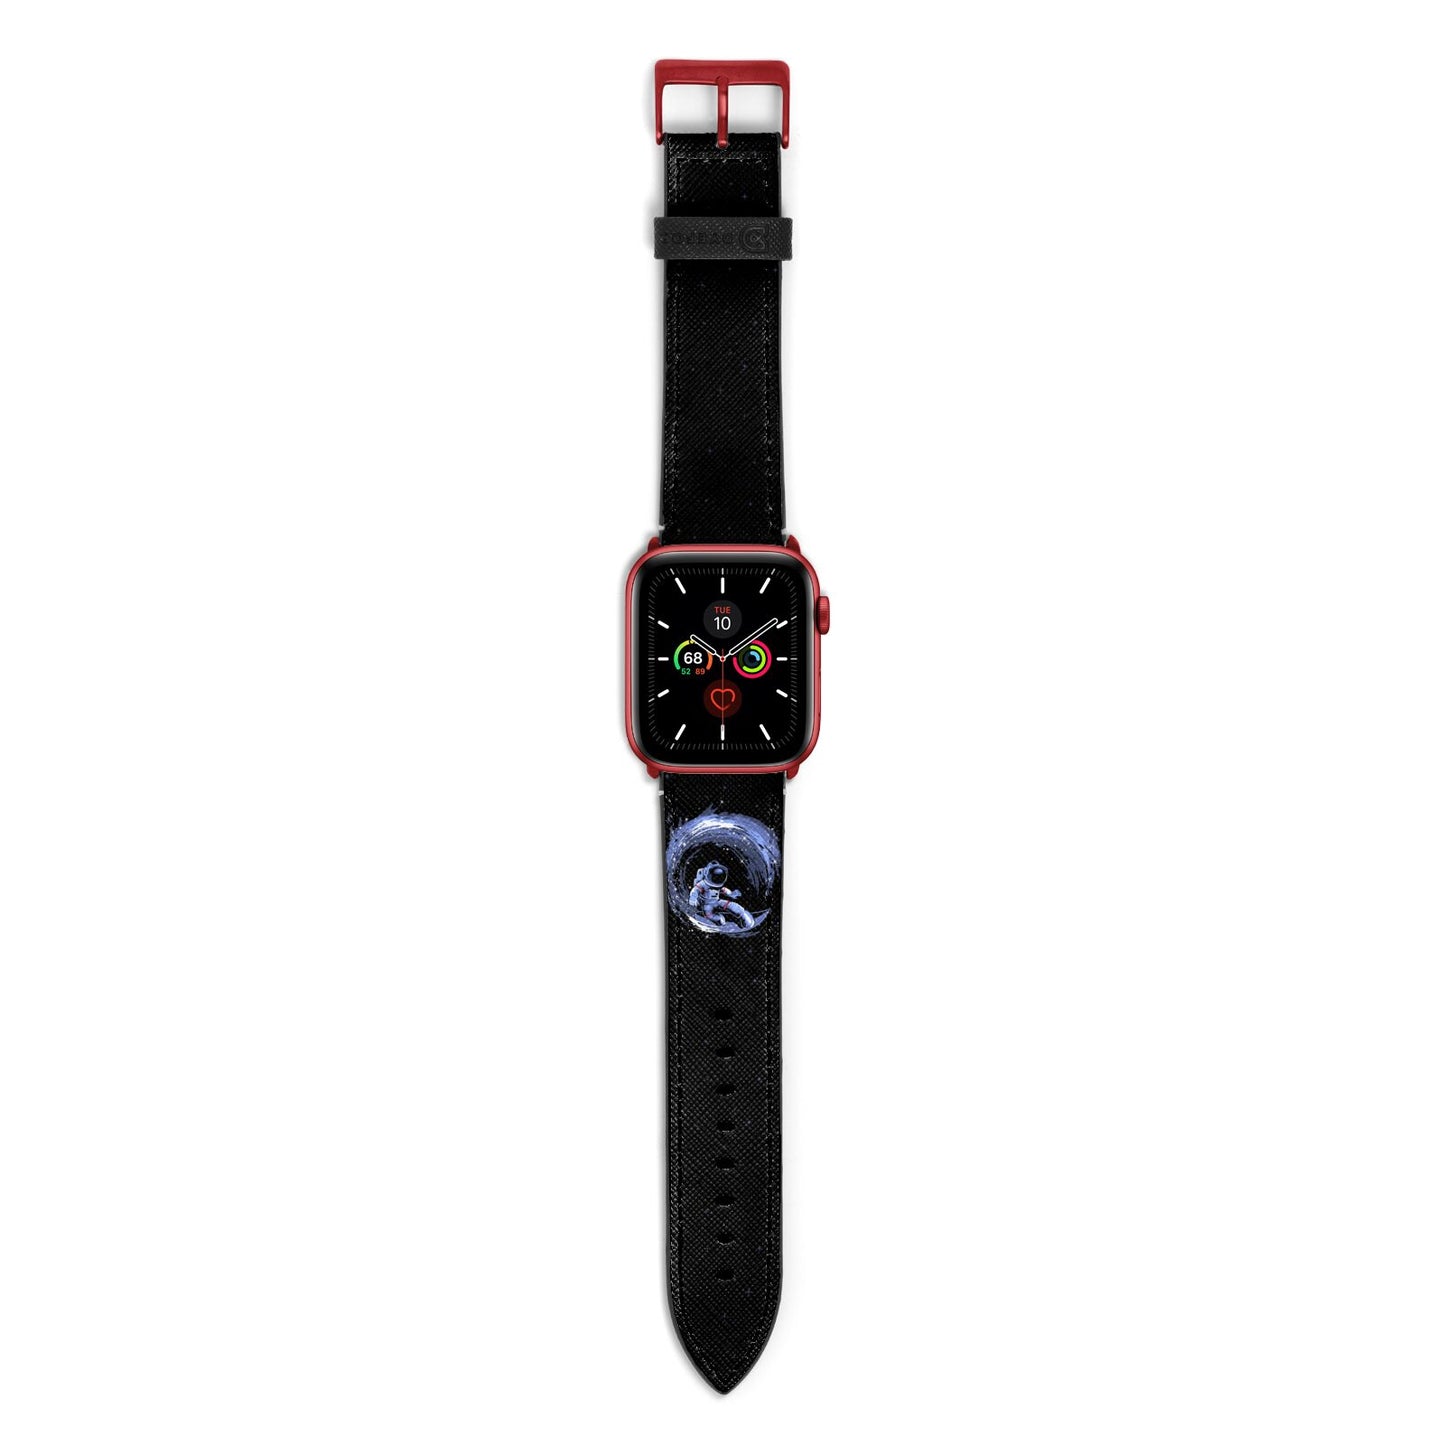 Surfing Astronaut Apple Watch Strap with Red Hardware